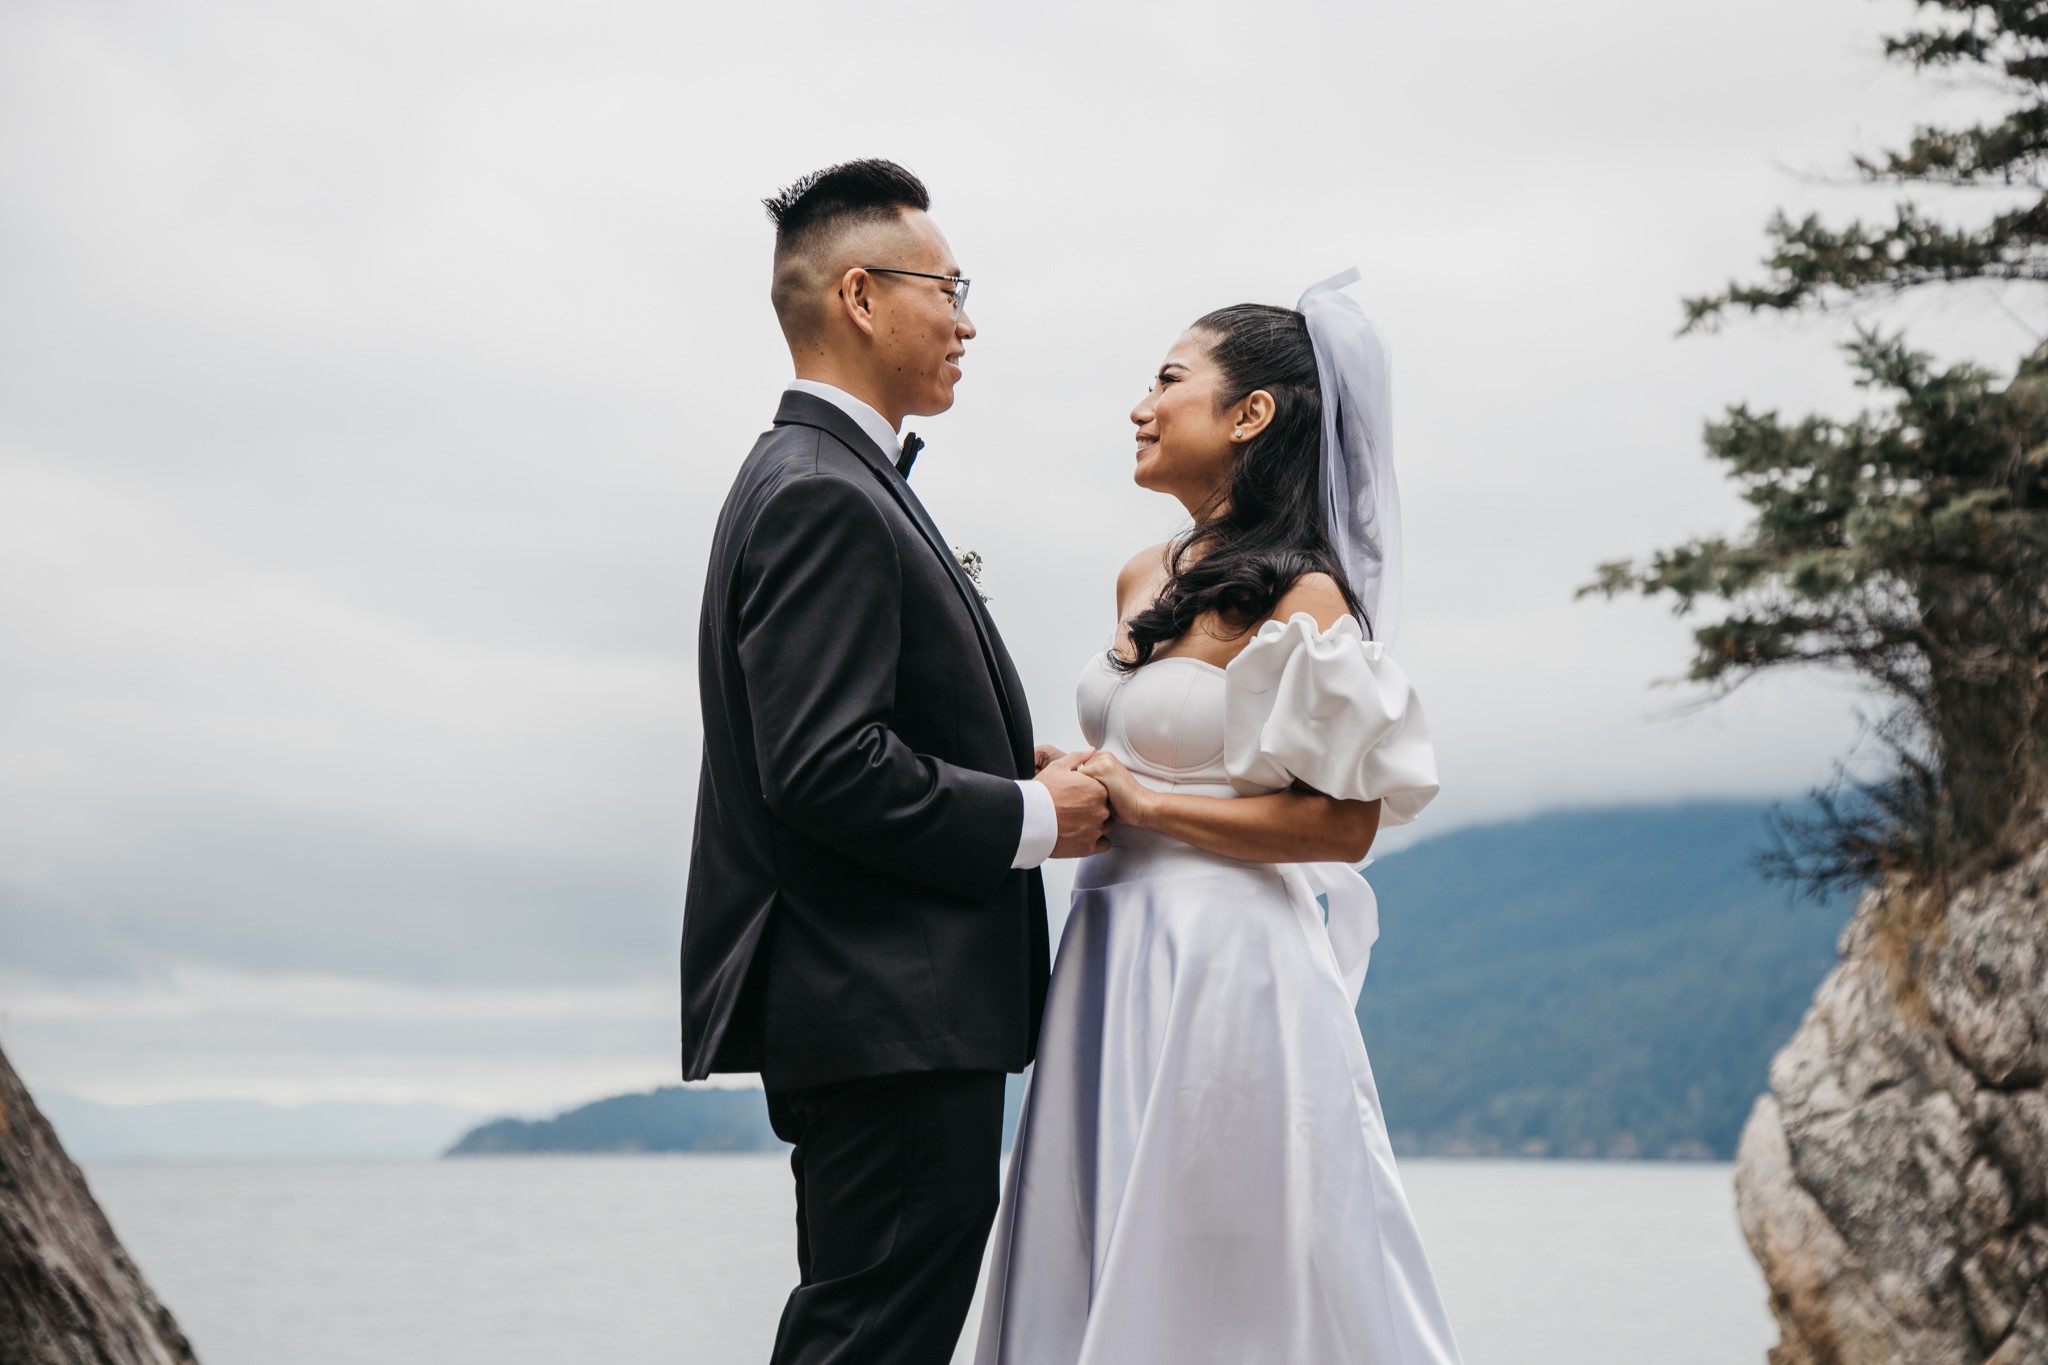 TRY OUT 5 EXCLUSIVE TIPS IF YOU WANT TO PERFECT YOUR WEDDING OUTDOOR PHOTOS